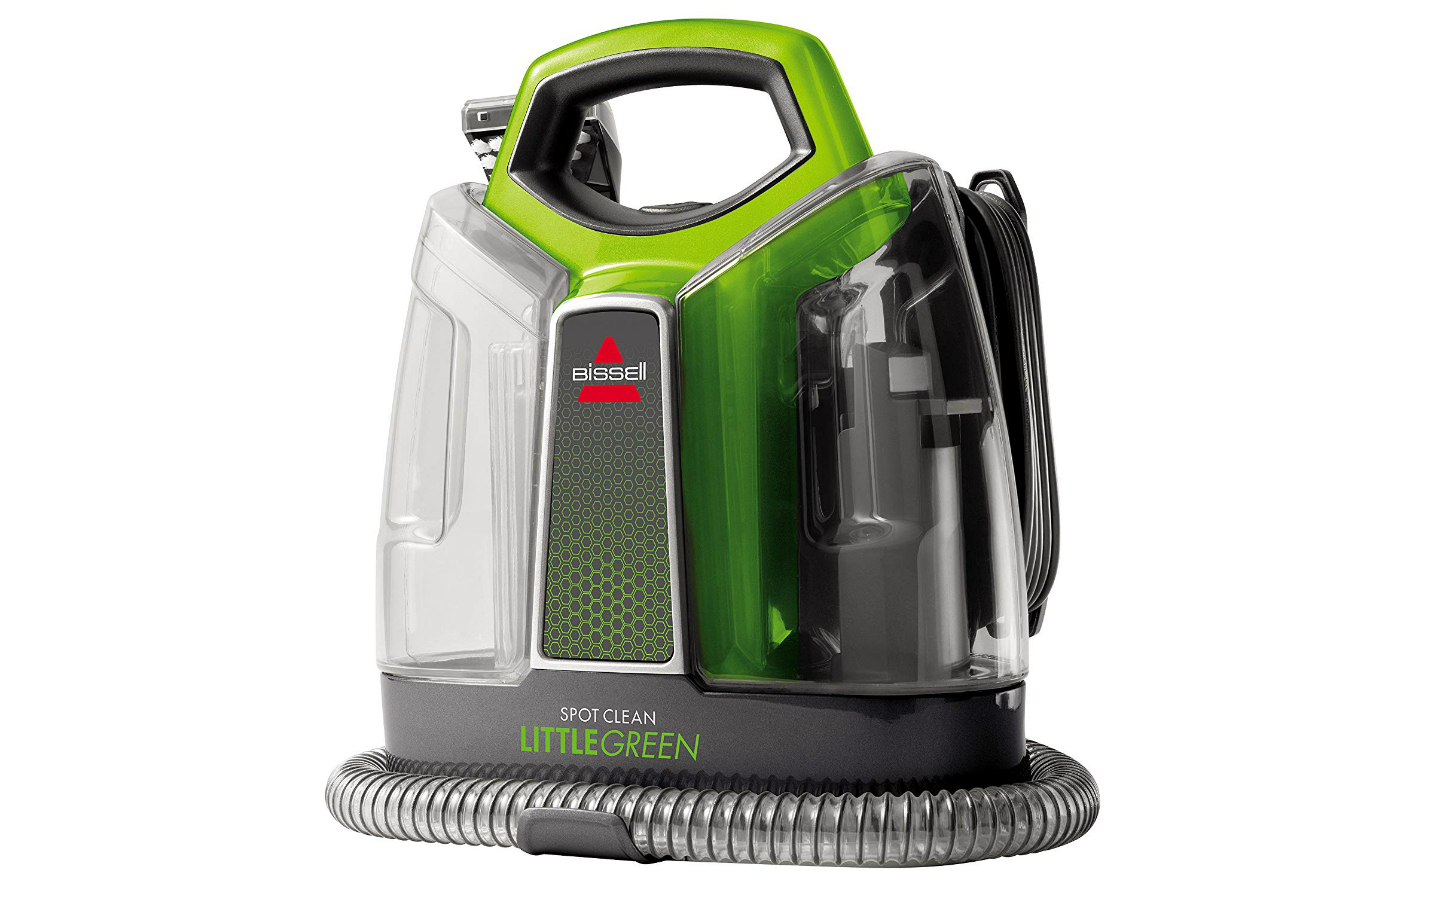 Christmas gift ideas for car fan: Bissell 3698L Little Green Carpet Cleaner